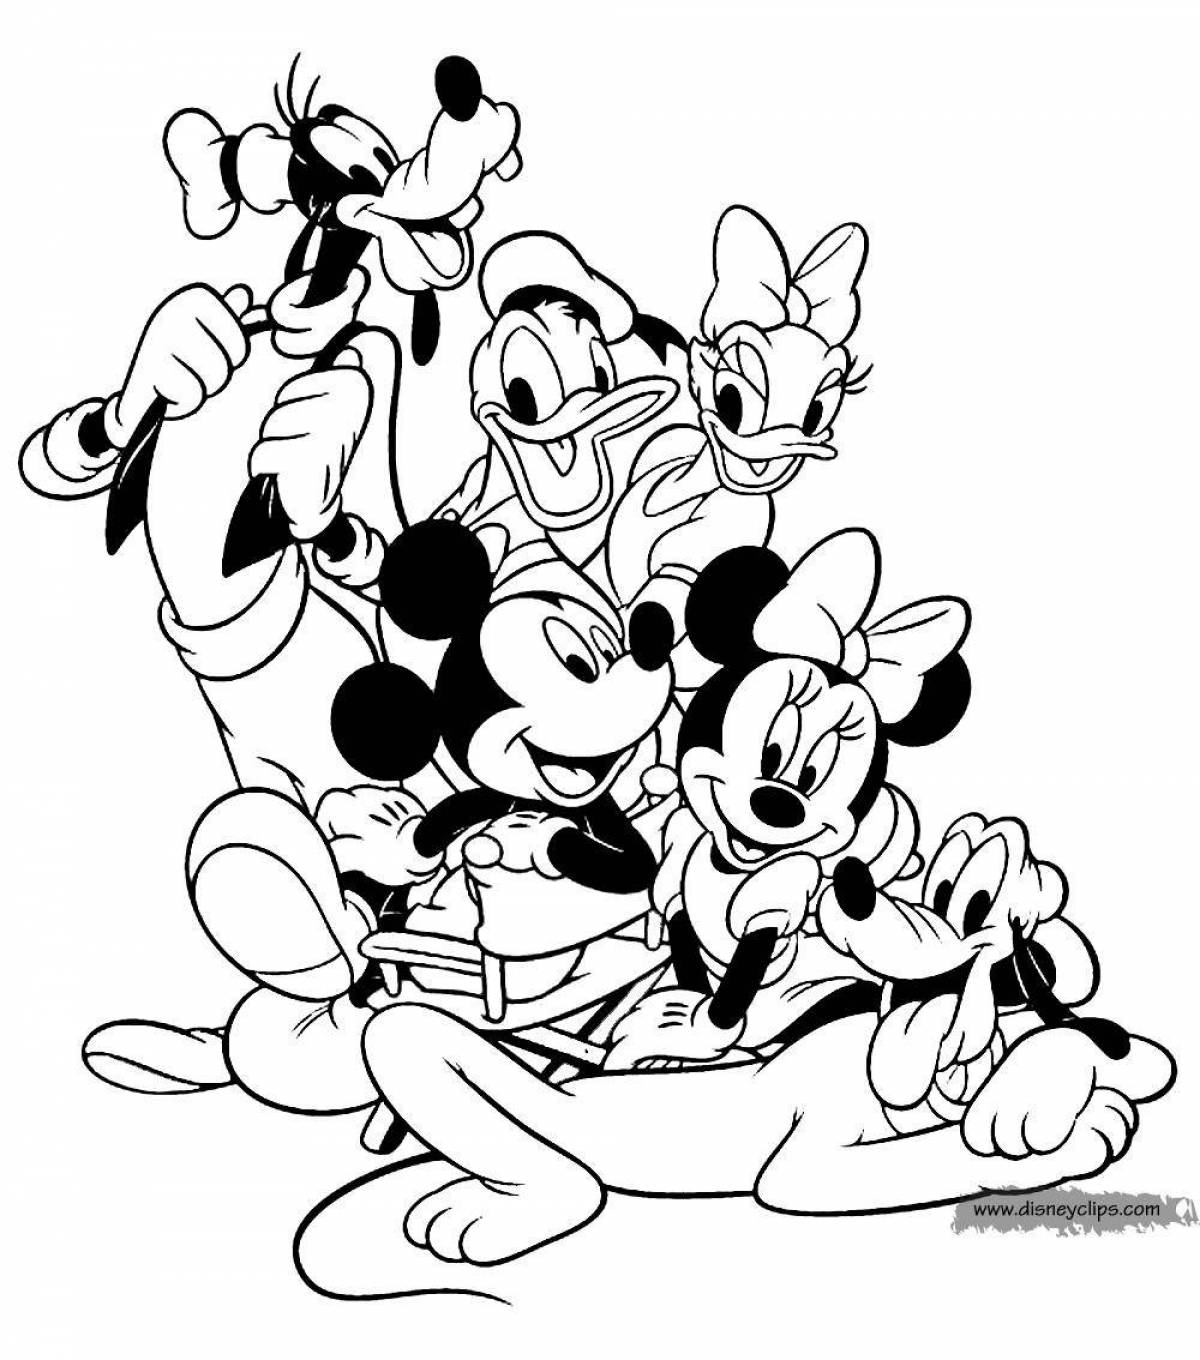 Mickey mouse shining coloring book